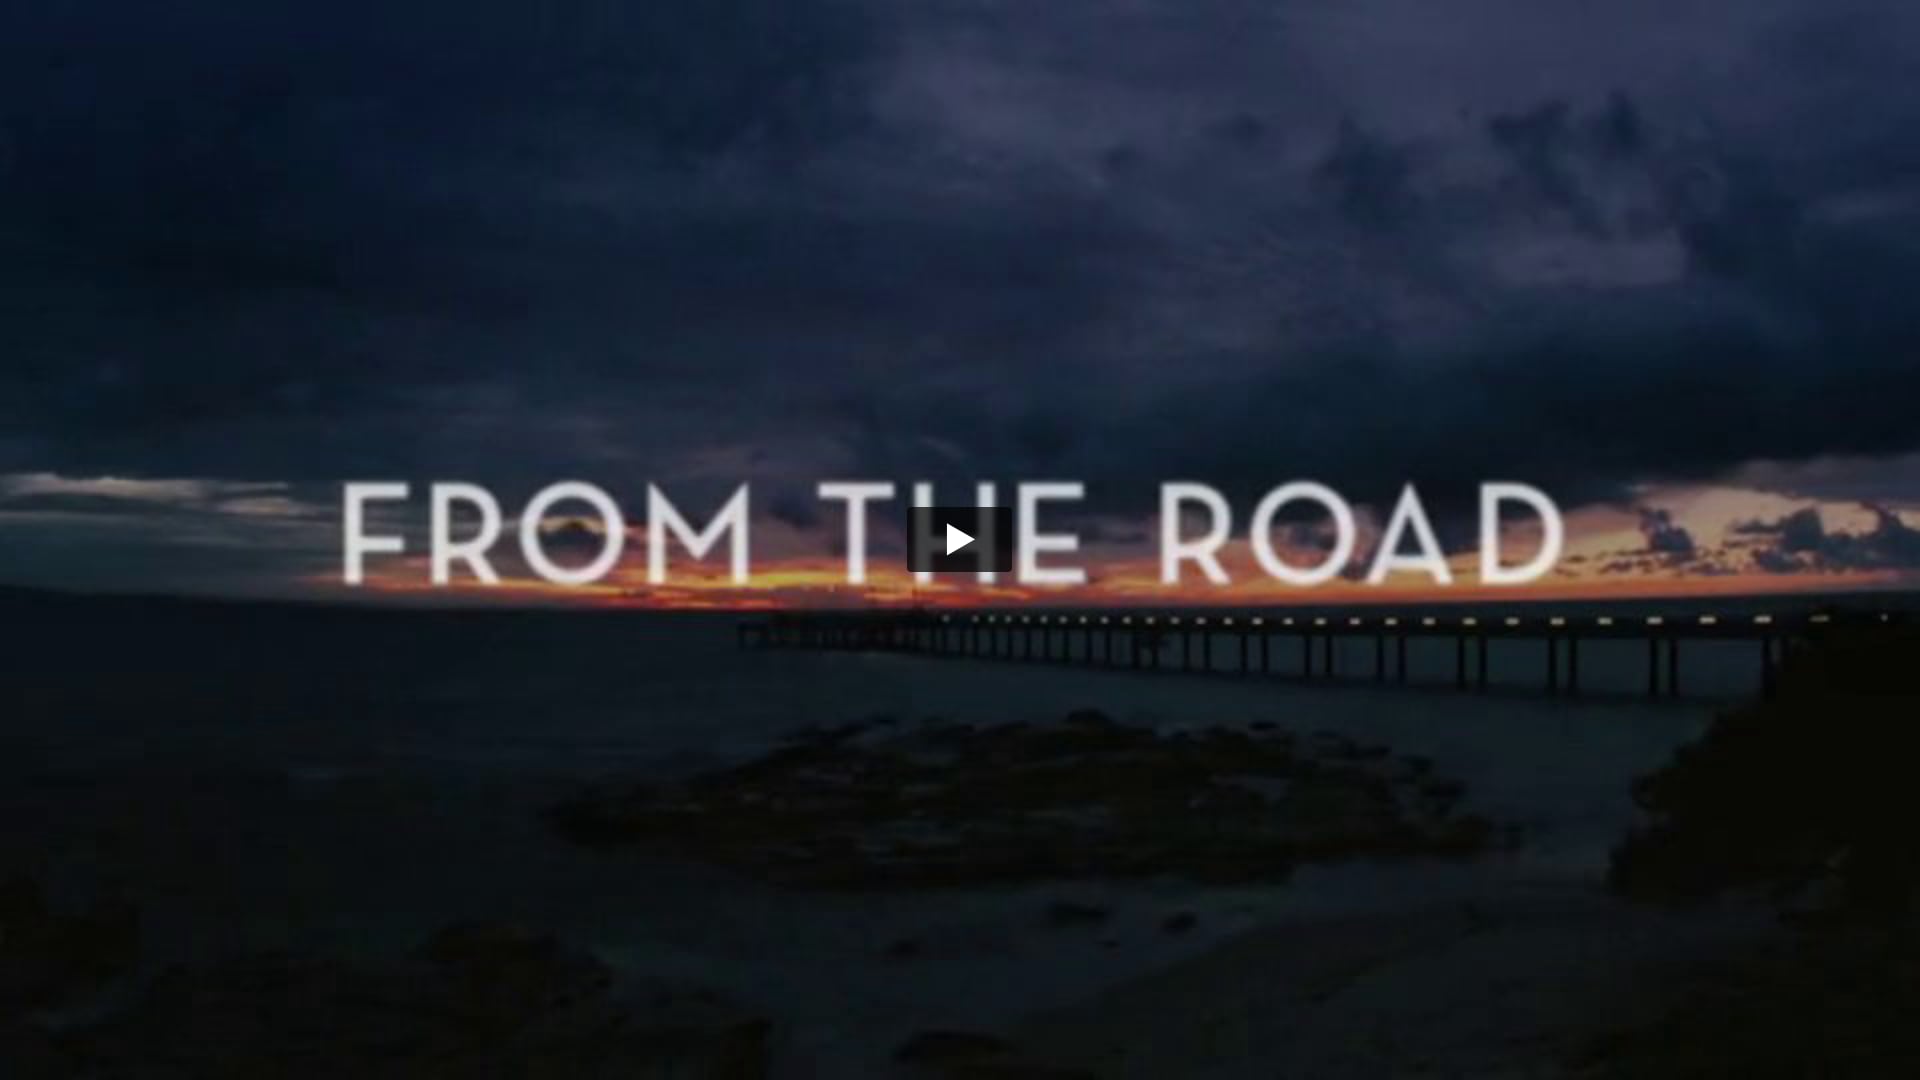 FROM THE ROAD - Aquabumps trip to The Great Ocean Road presented by Telstra